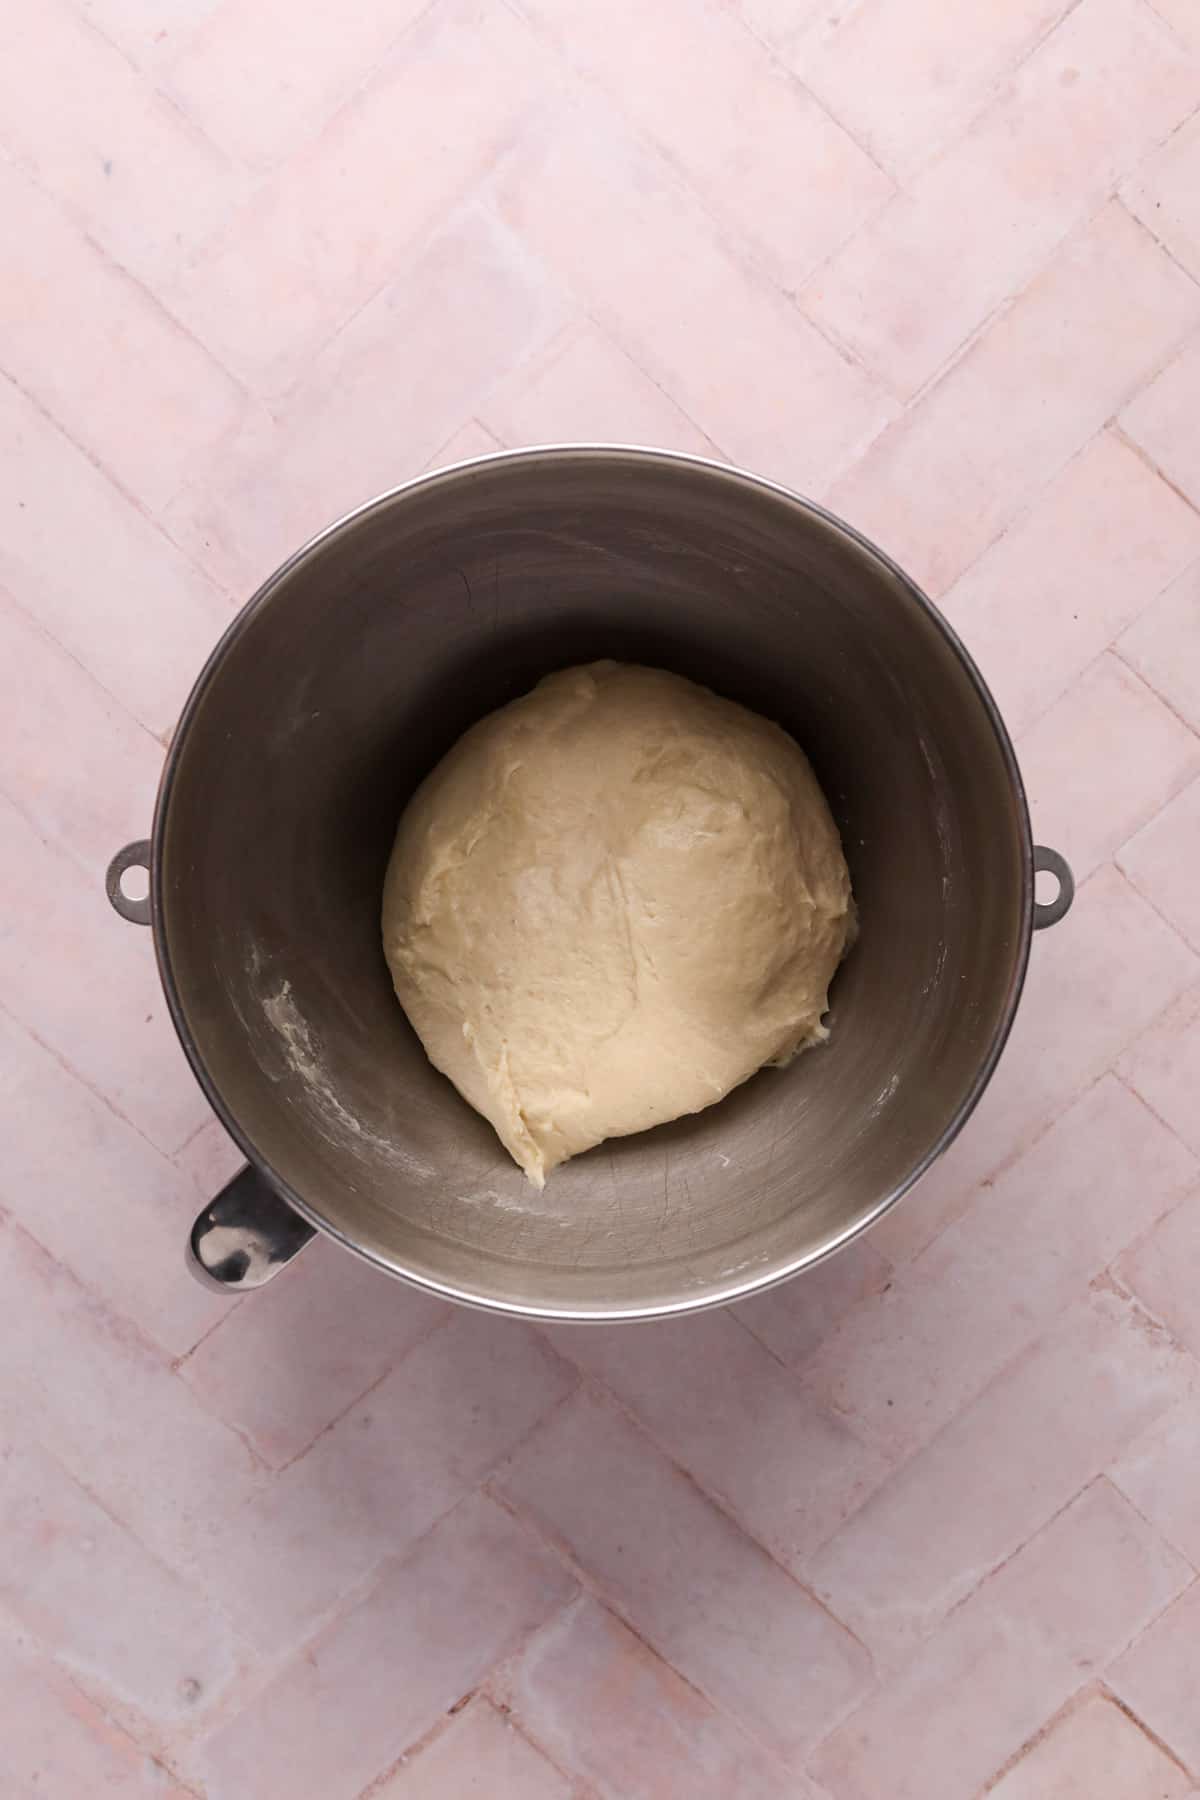 Mixed cinnamon roll dough in a metal stand mixer bowl on a flat surface.